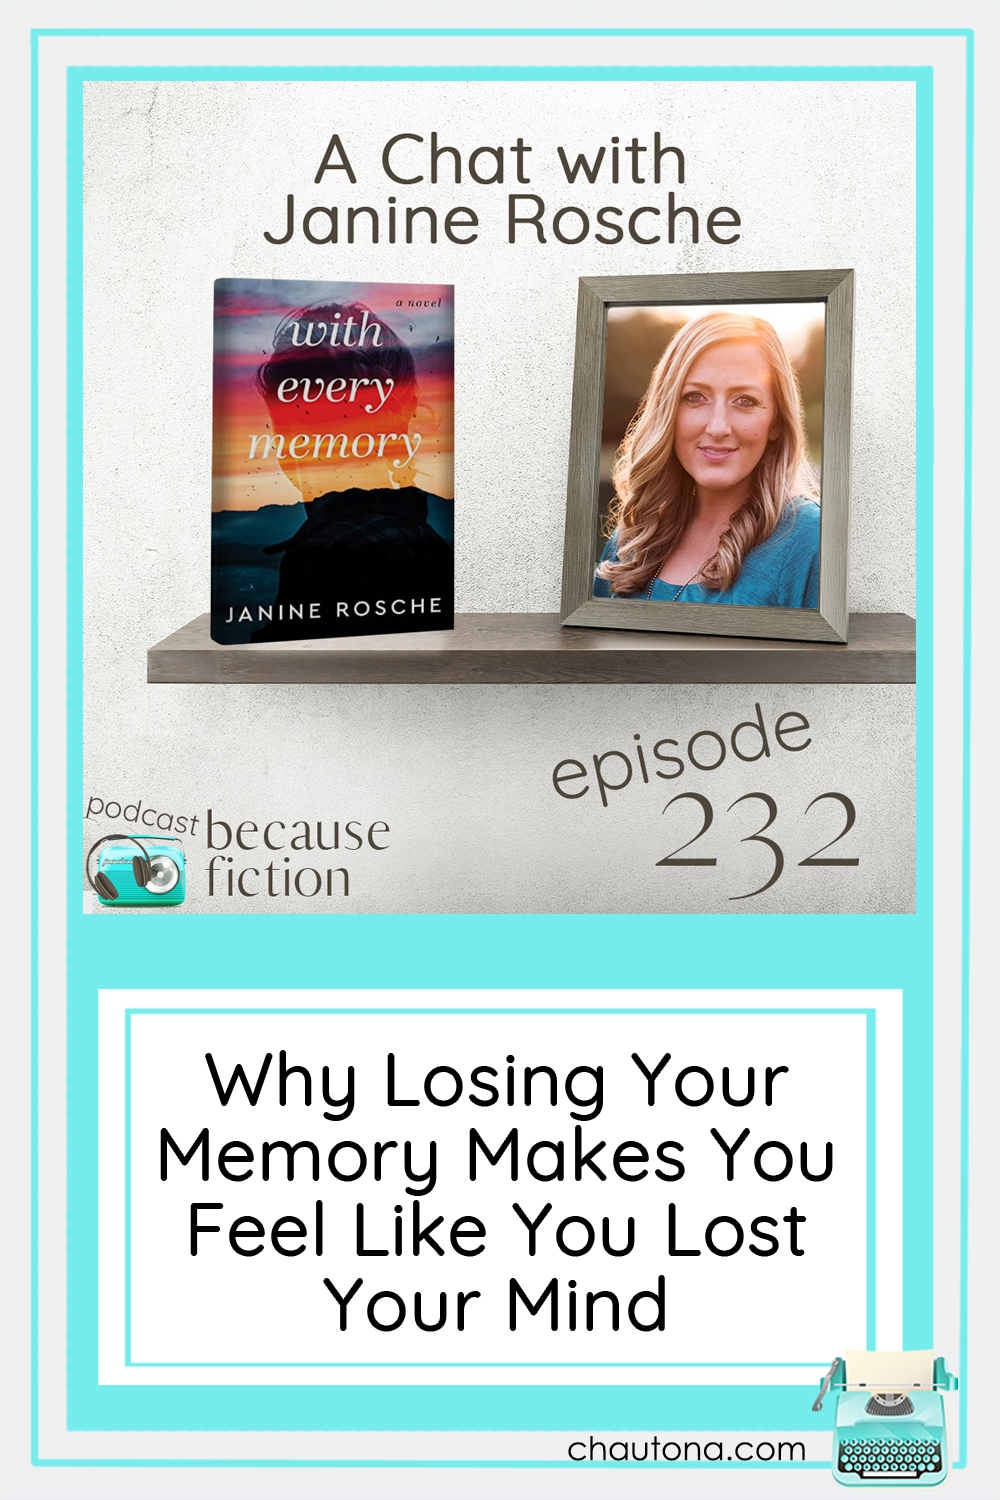 Listen in and learn how to get With Every Memory by Janine Rosche with all the preorder goodies available before June 6th! via @chautonahavig